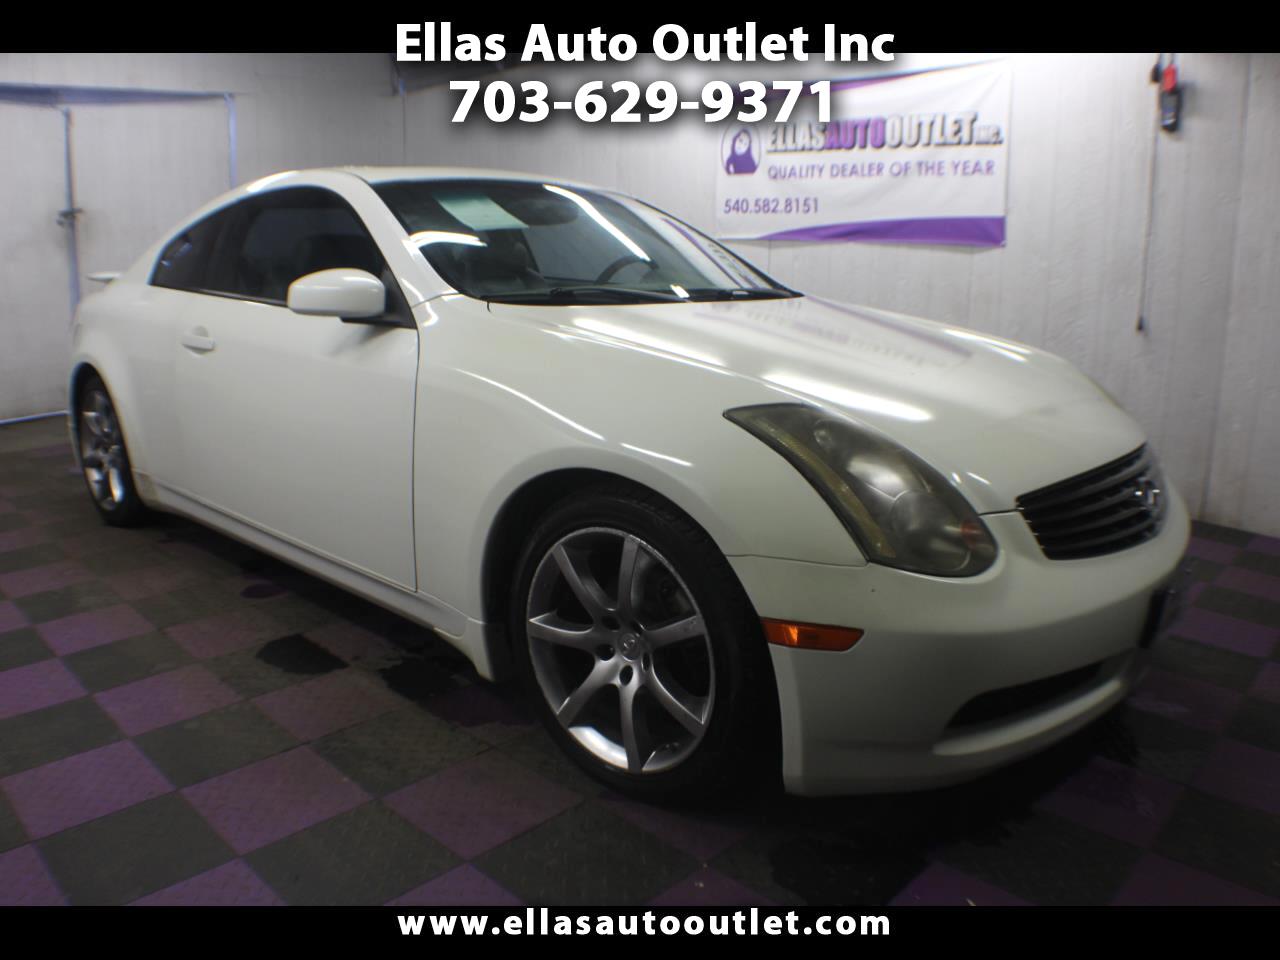 Used 2004 Infiniti G35 Coupe 2dr Cpe Auto W Leather For Sale In